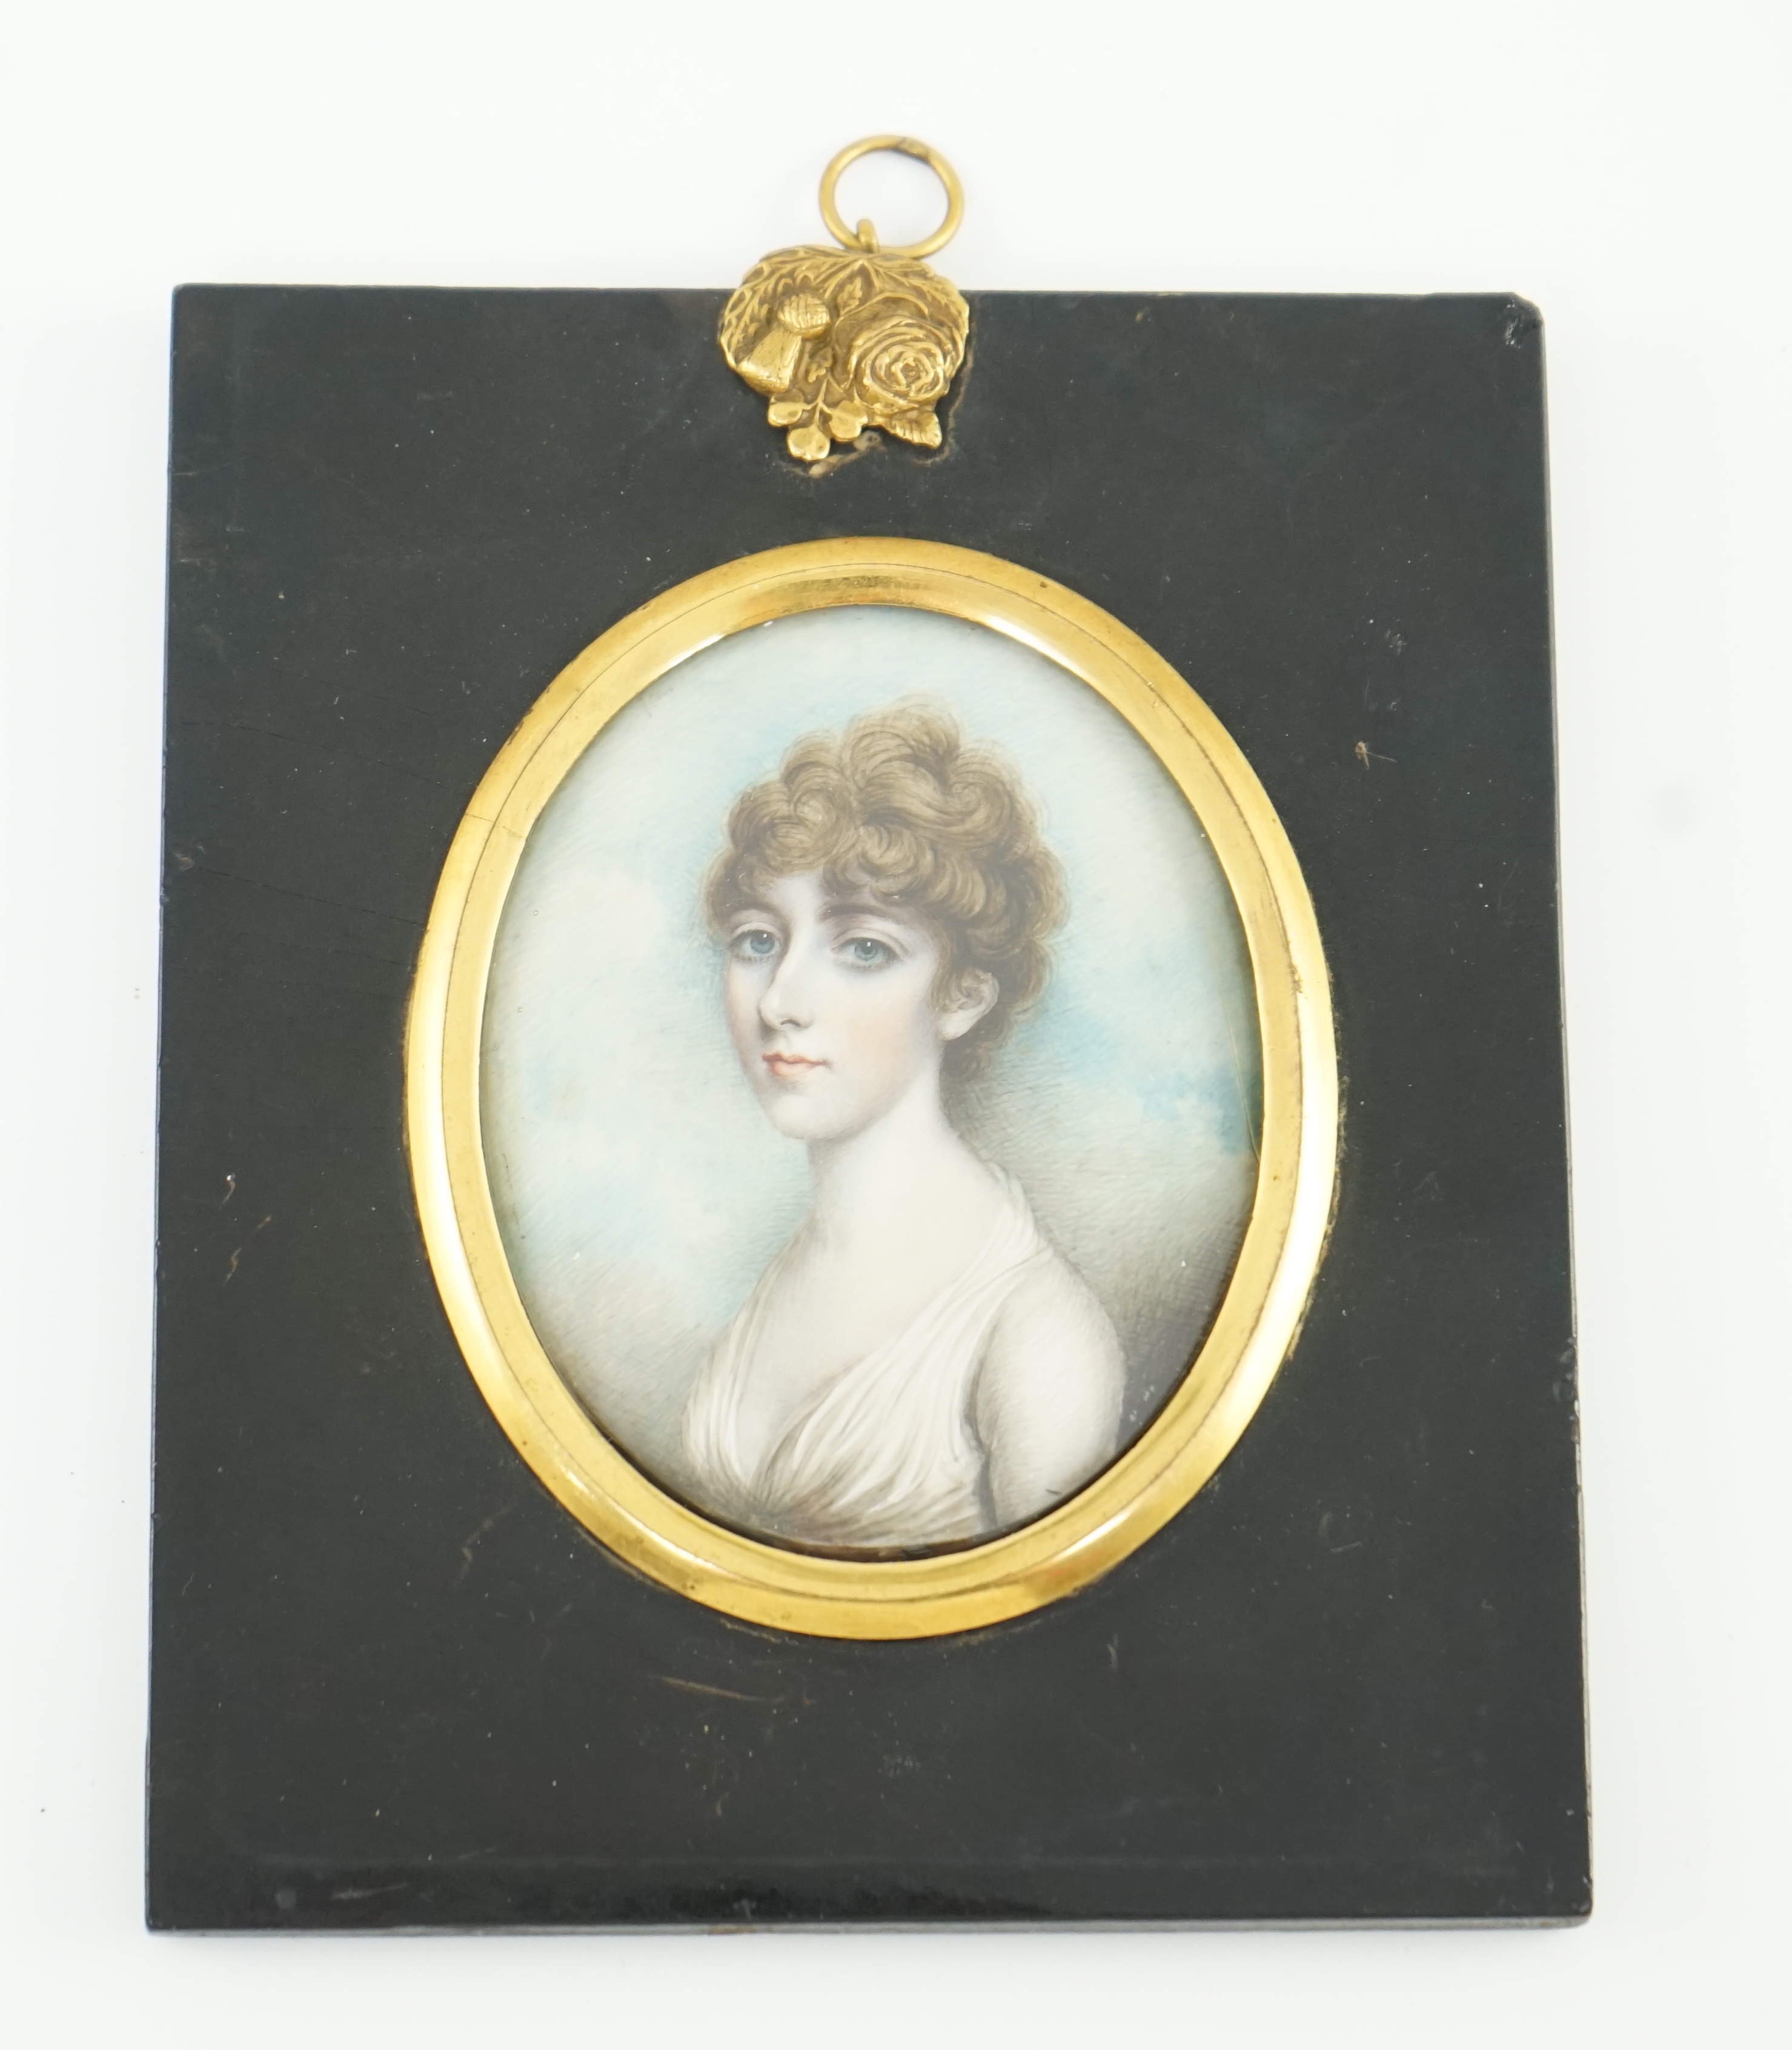 Andrew Plimer (1763-1837), Portrait miniature of Grace M.Smith, watercolour on ivory, 7.2 x 5.8cm. CITES Submission reference LR5338ZR